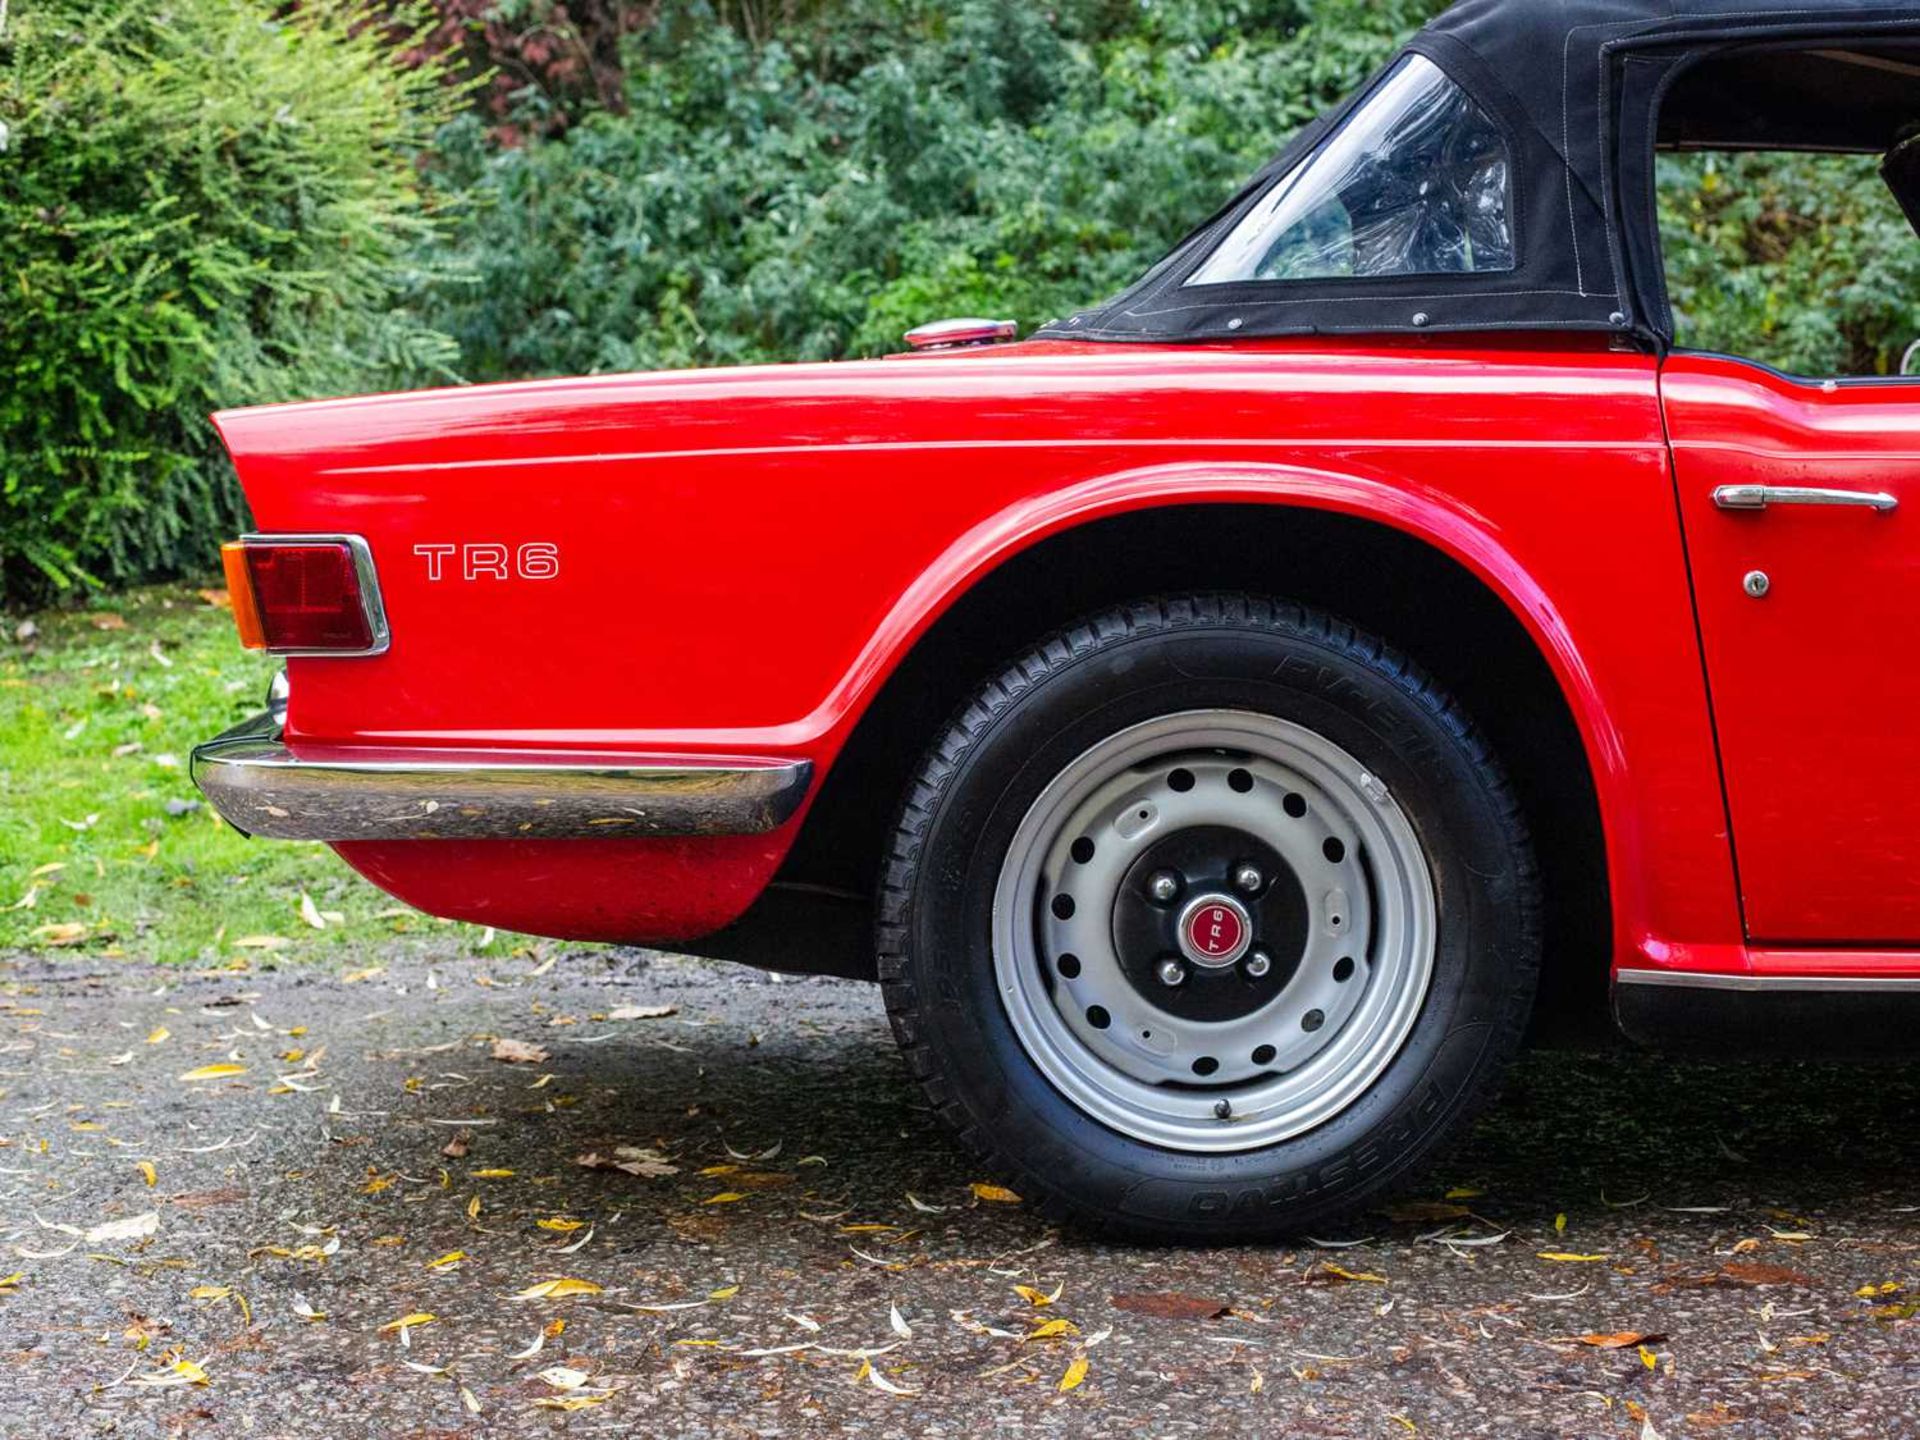 1969 Triumph TR6 Repatriated in 2020, converted to RHD and equipped with UK-specification SU carbure - Image 13 of 53